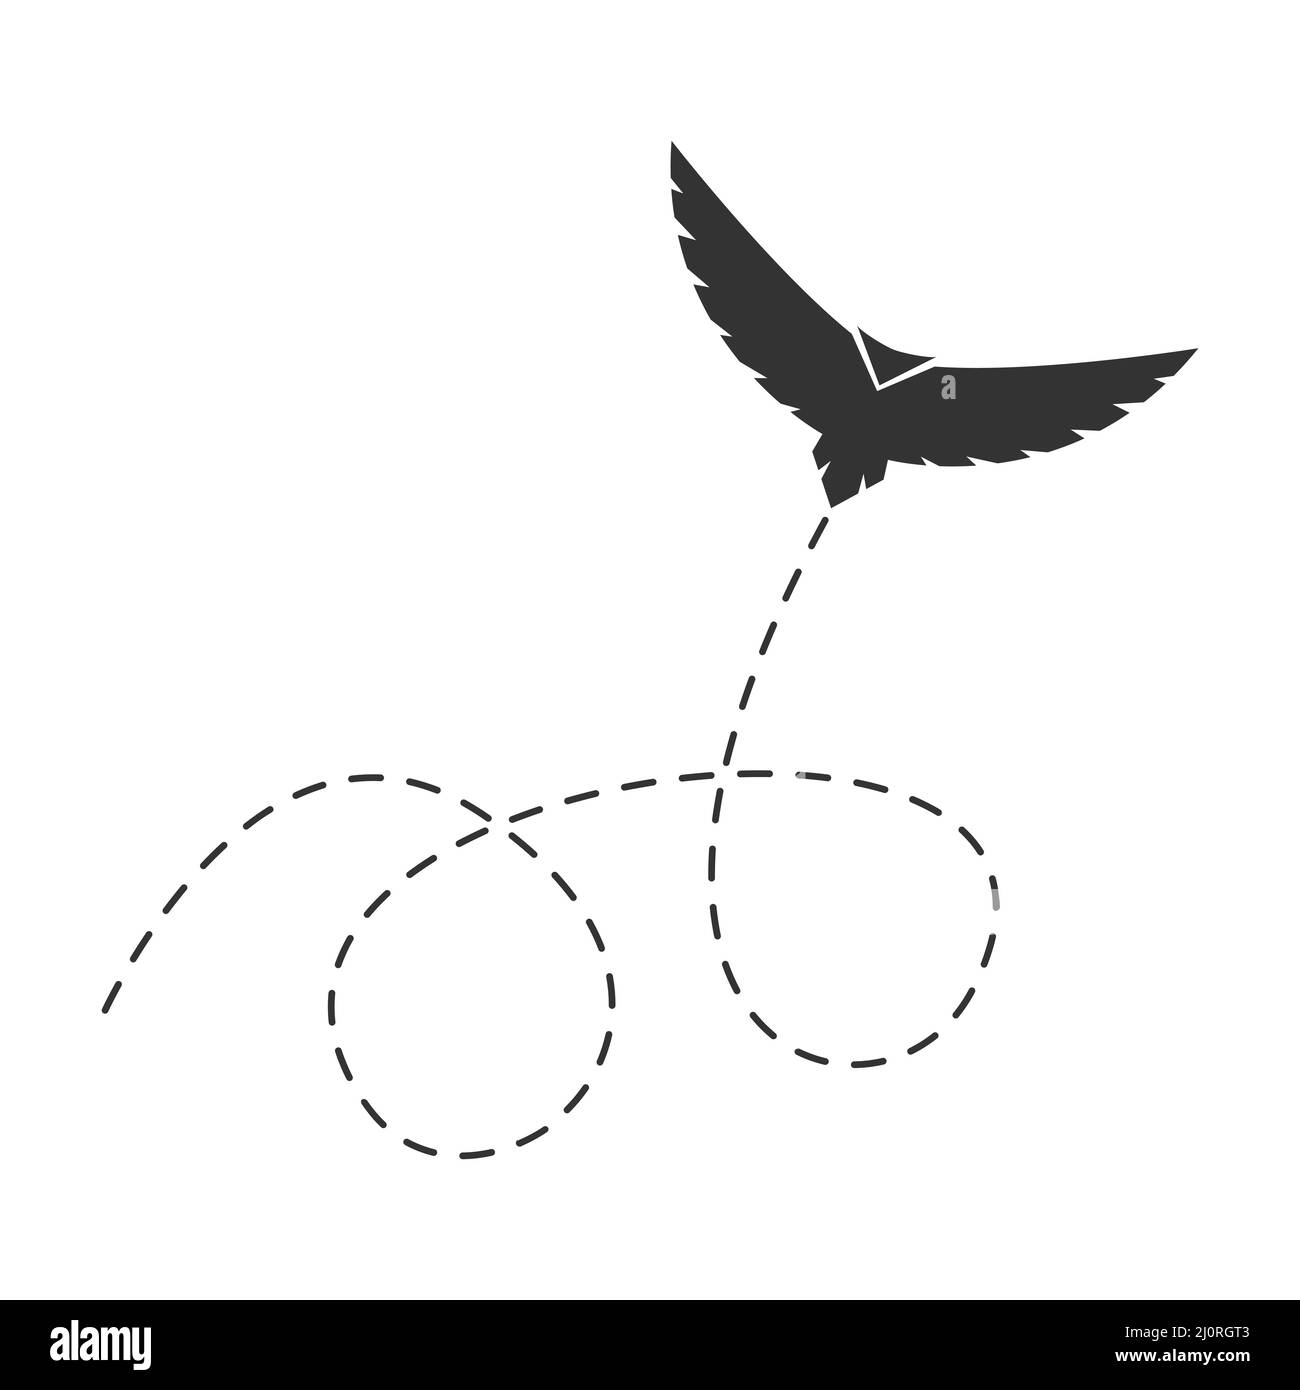 Flying black bird with dotted route. Vector illustration isolated on white. Stock Vector